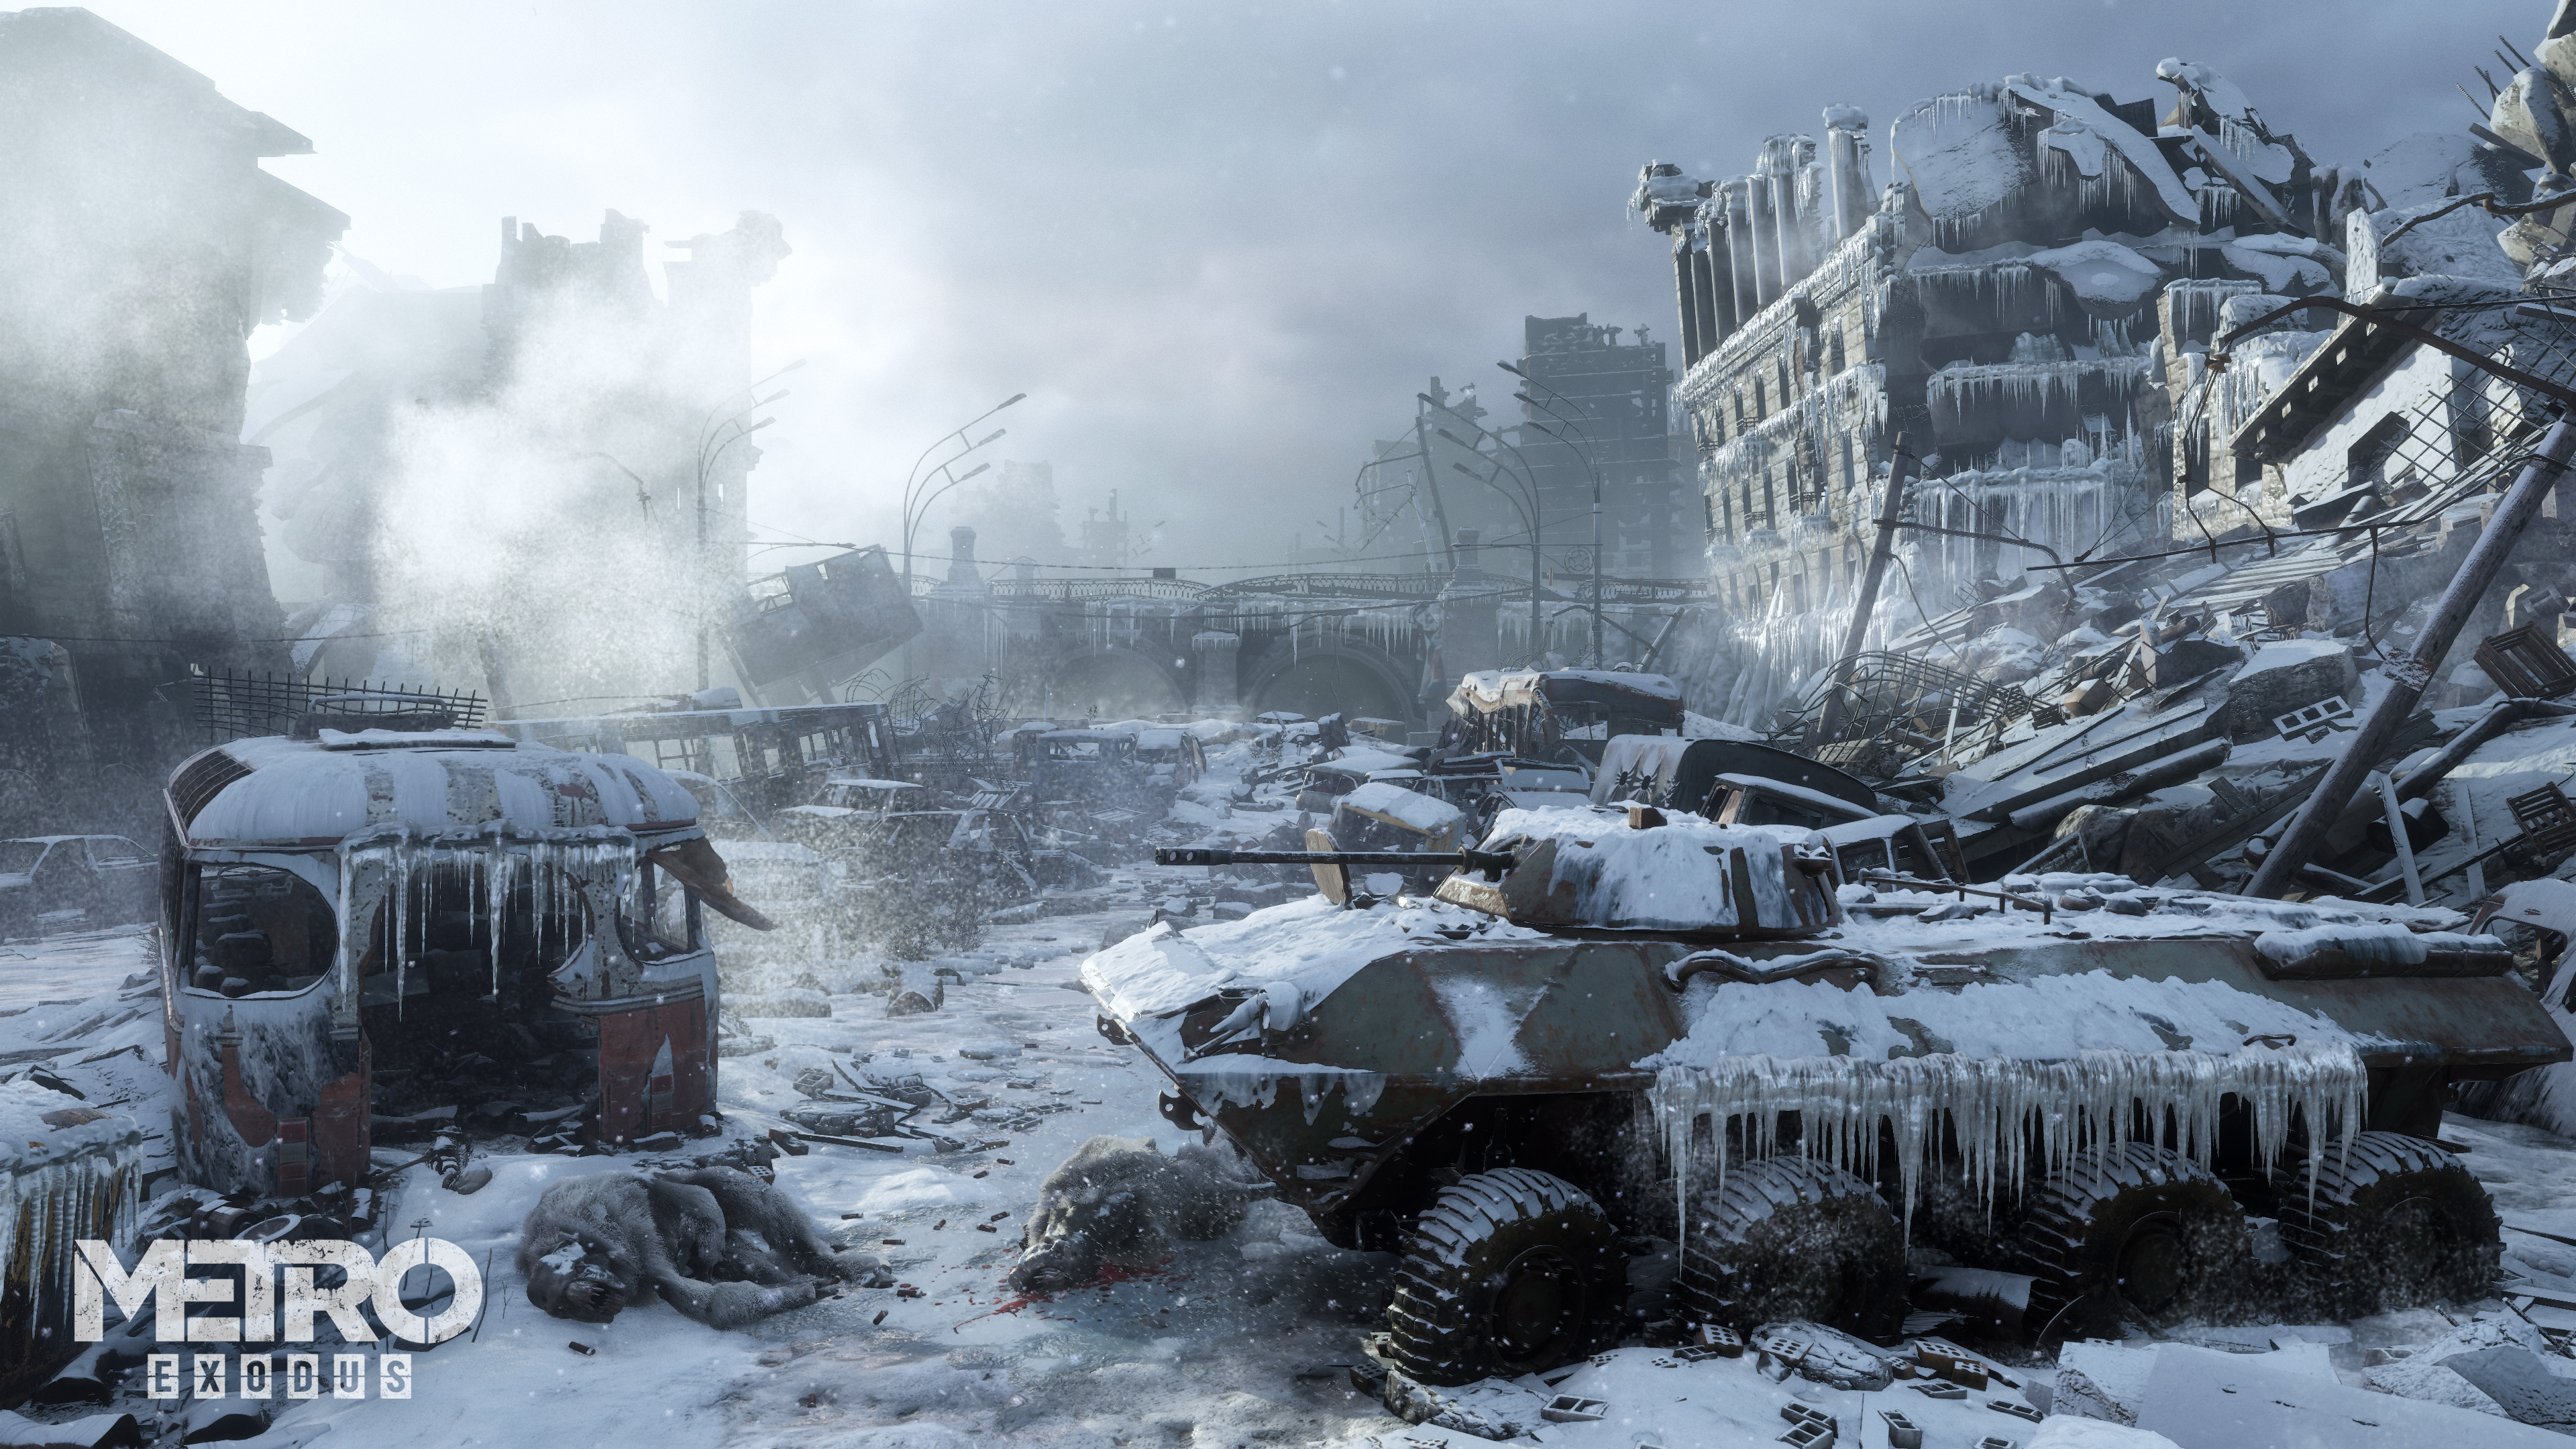 Media asset in full size related to 3dfxzone.it news item entitled as follows: Deep Silver pubblica il trailer del game Metro Exodus in 4K per GamesCom 2018 | Image Name: news28607_Metro-Exodus-Screenshot_4.jpg